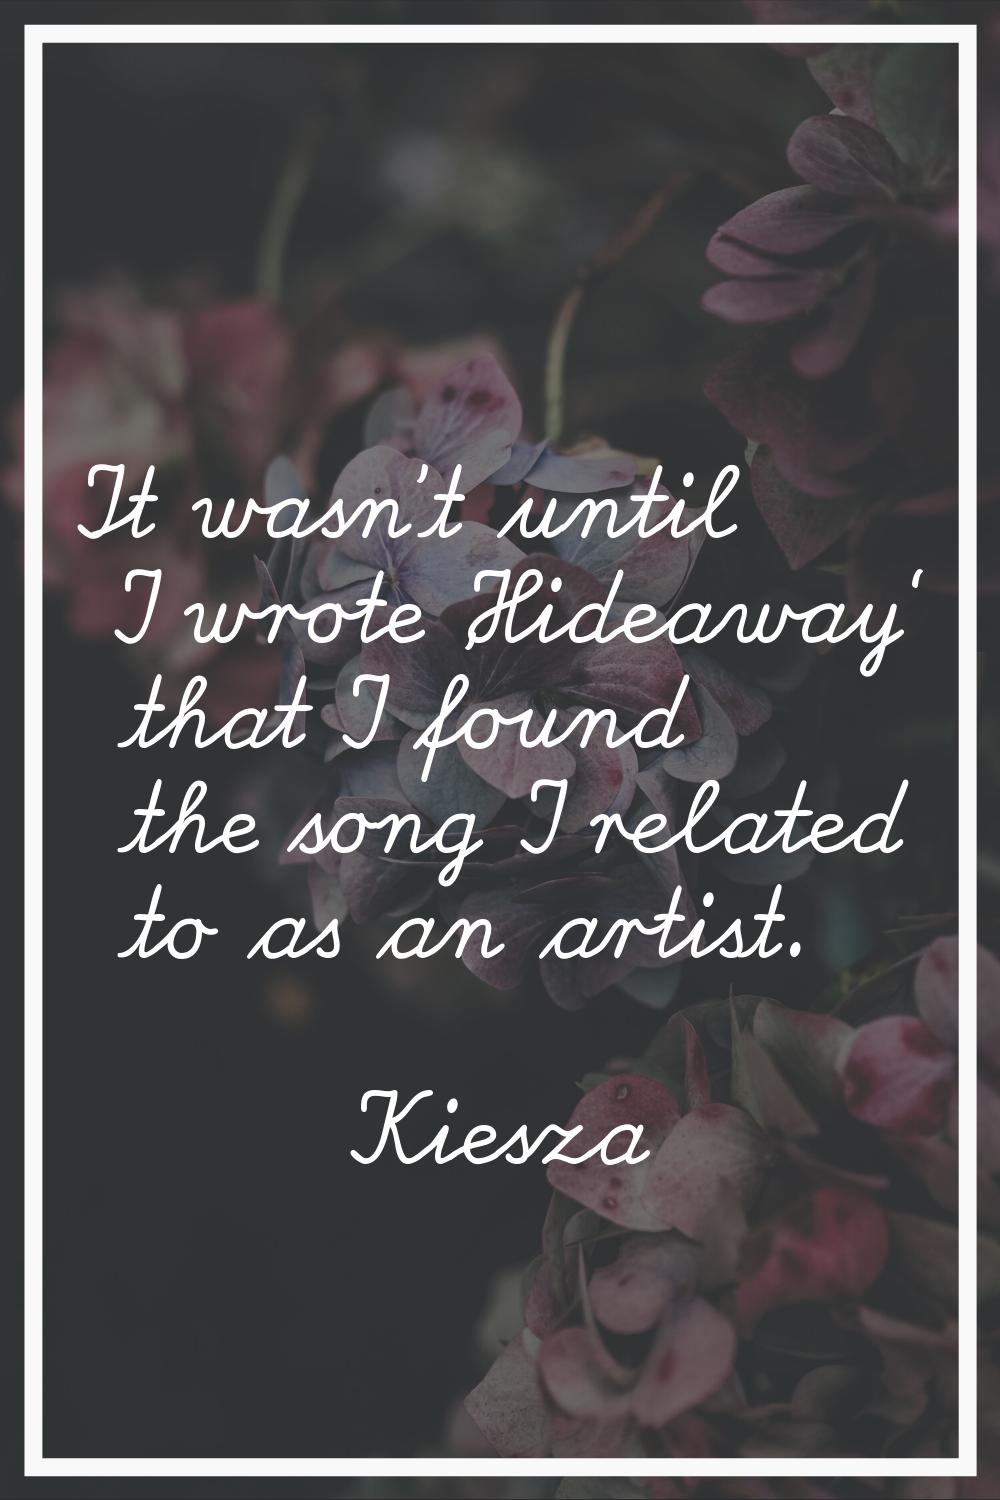 It wasn't until I wrote 'Hideaway' that I found the song I related to as an artist.